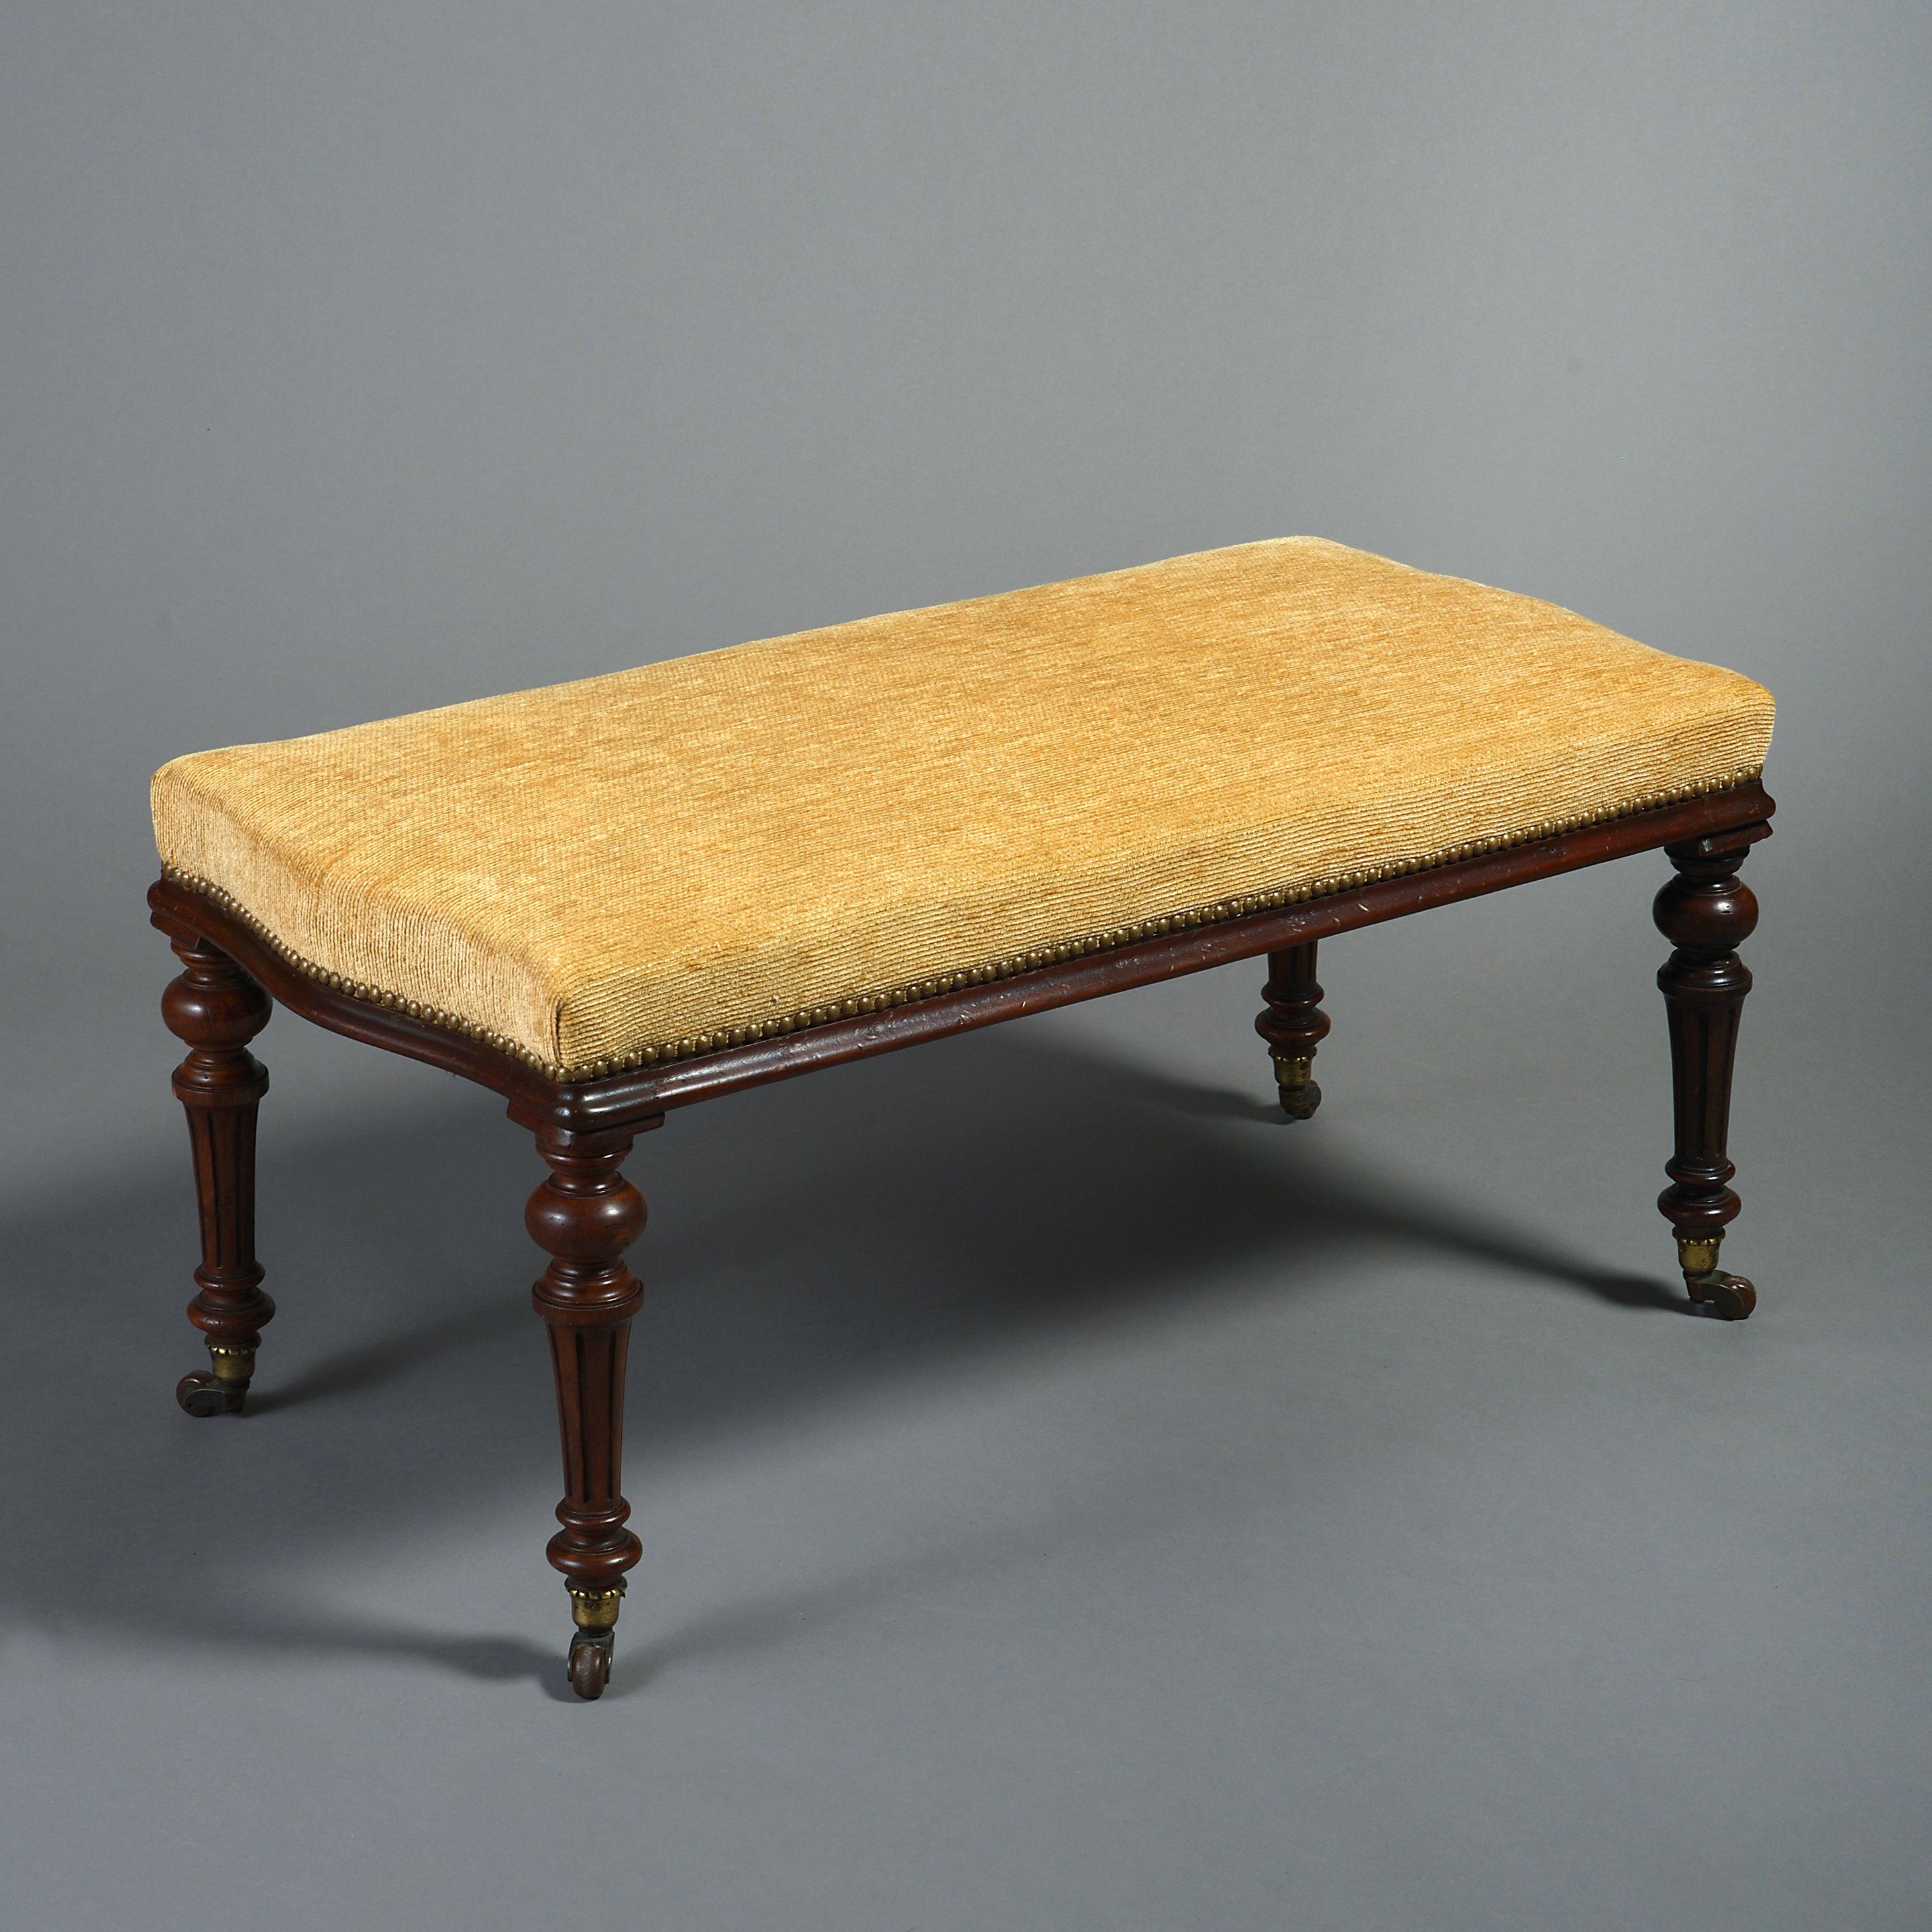 A pair of mid-19th century Victorian Period long stools or benches, each having an upholstered seat with serpentine ends, raised upon four turned burr oak, fluted legs, terminating on the original ceramic castors.